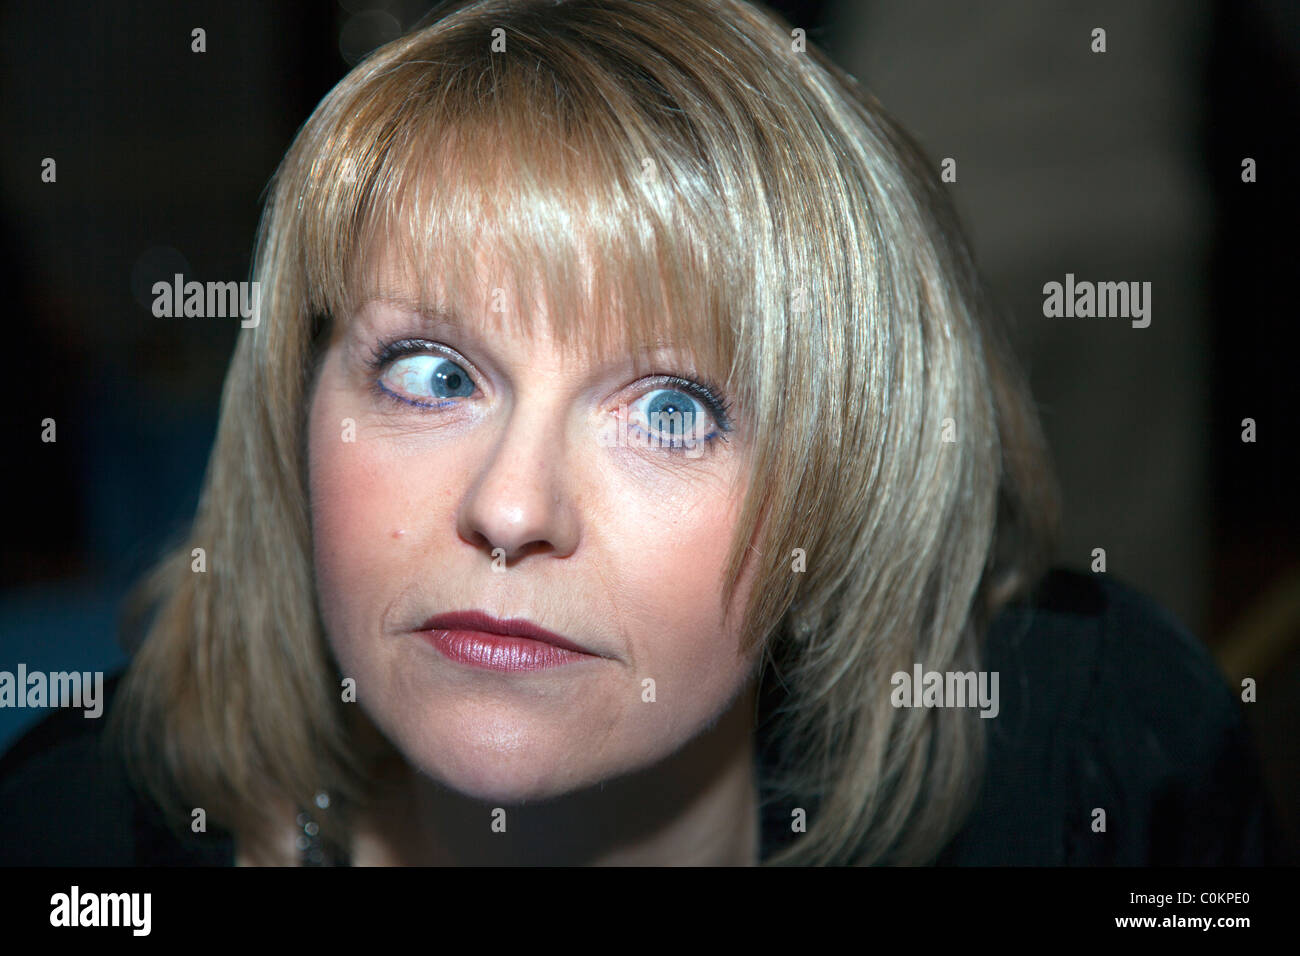 Cross eyed lady with Esotropia a lazy eye that looks in towards the nose Stock Photo